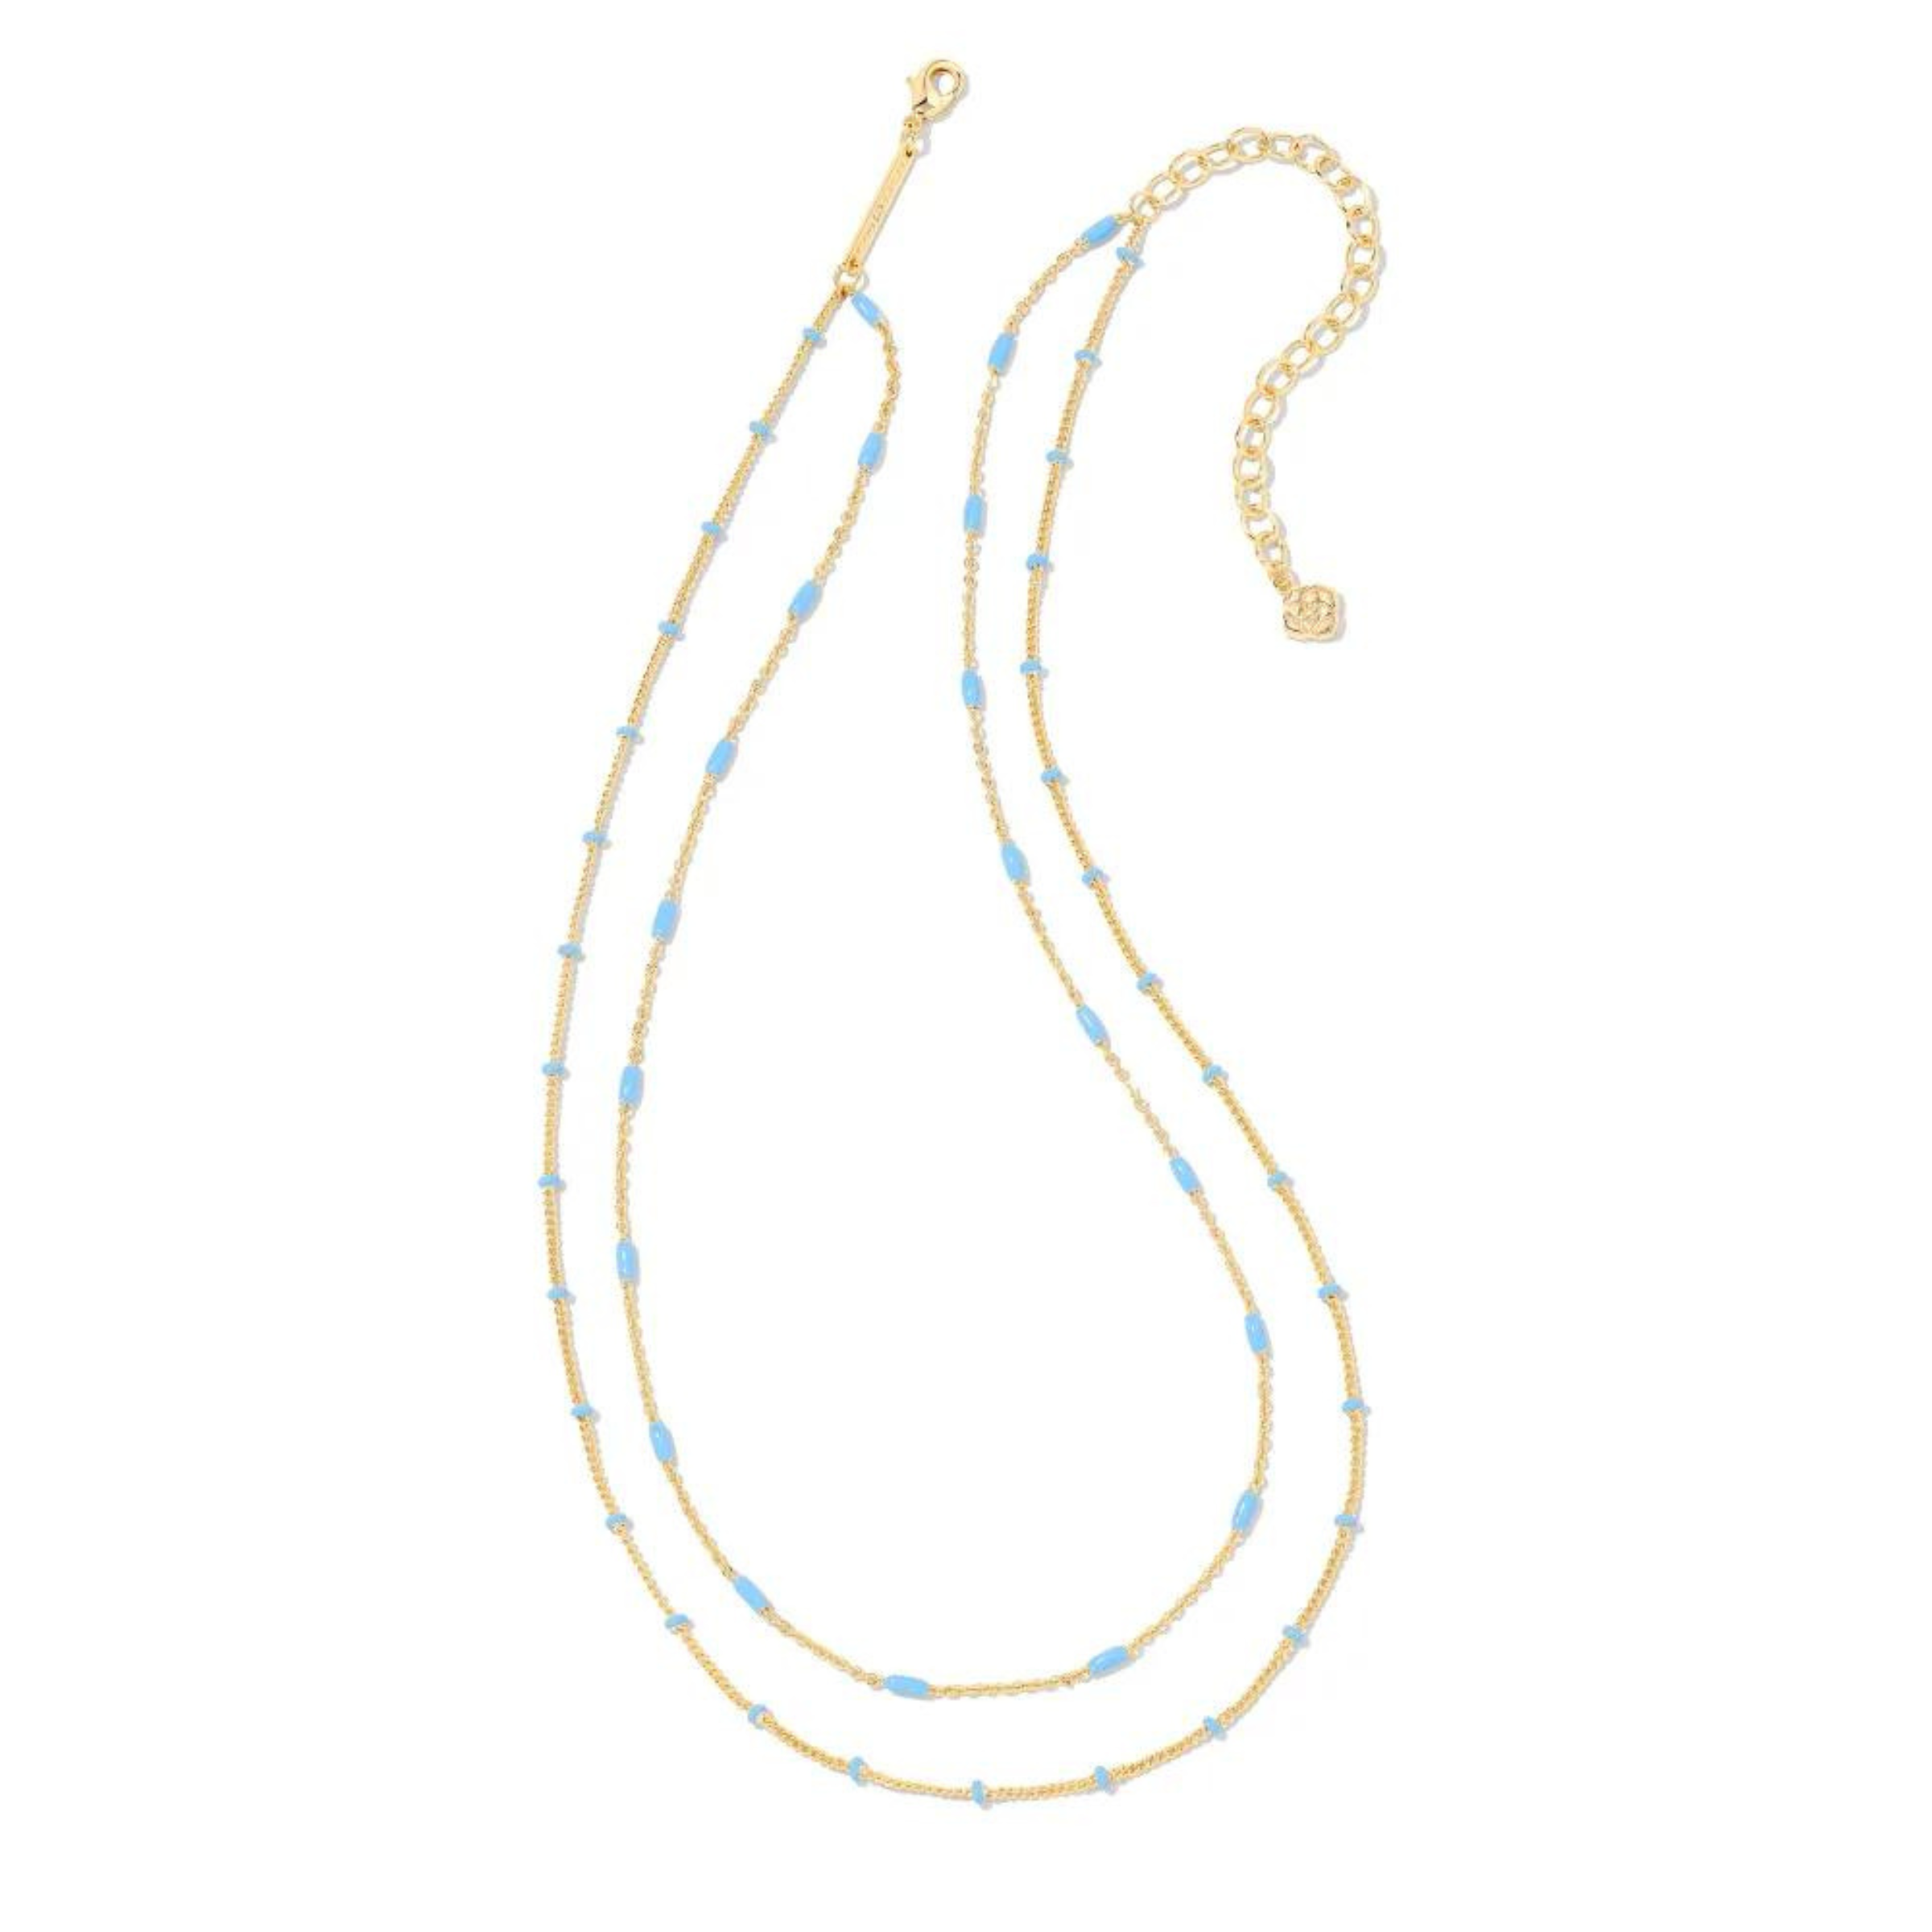 Two strand, adjustable chain necklace with periwinkle enamel spacers. This necklace is pictured on a white background. 